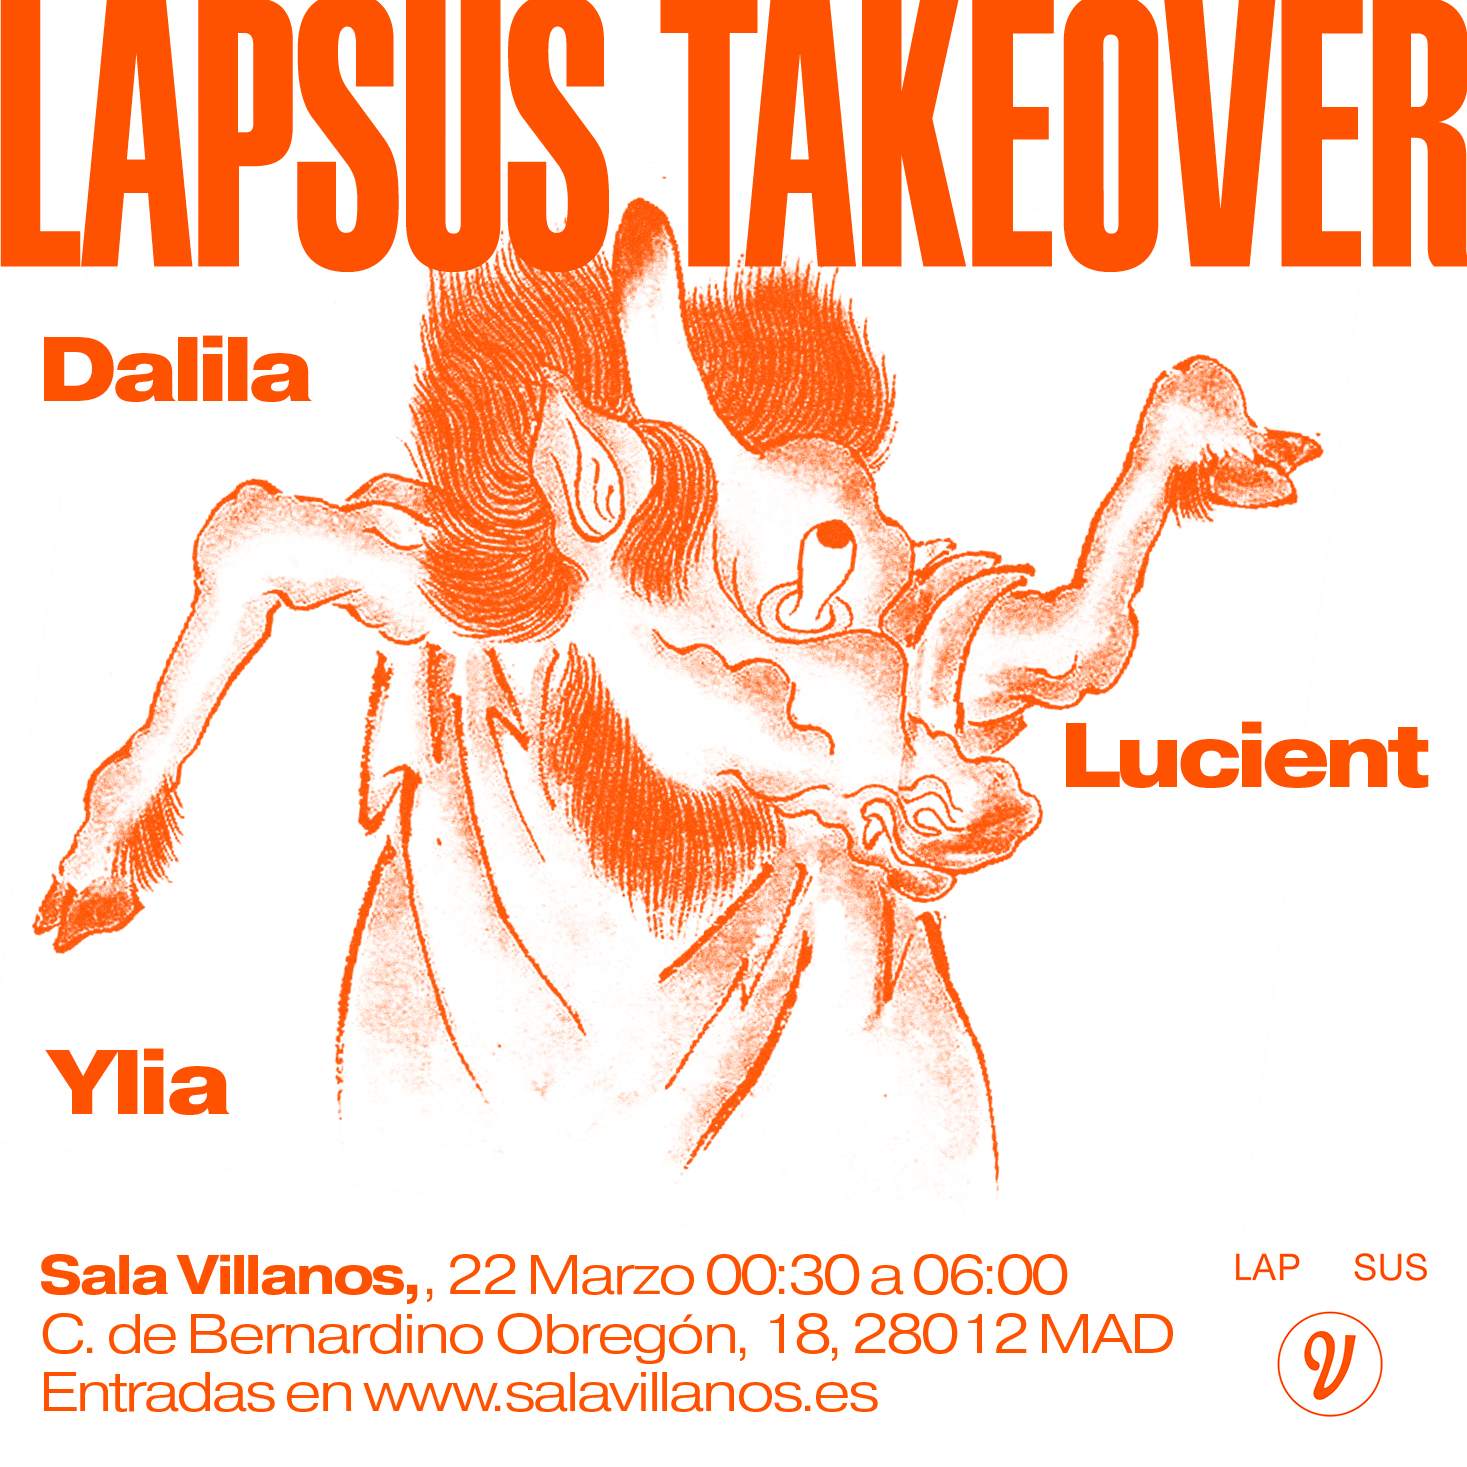 Lapsus Takeover: DALILA, Lucient, Ylia - フライヤー表